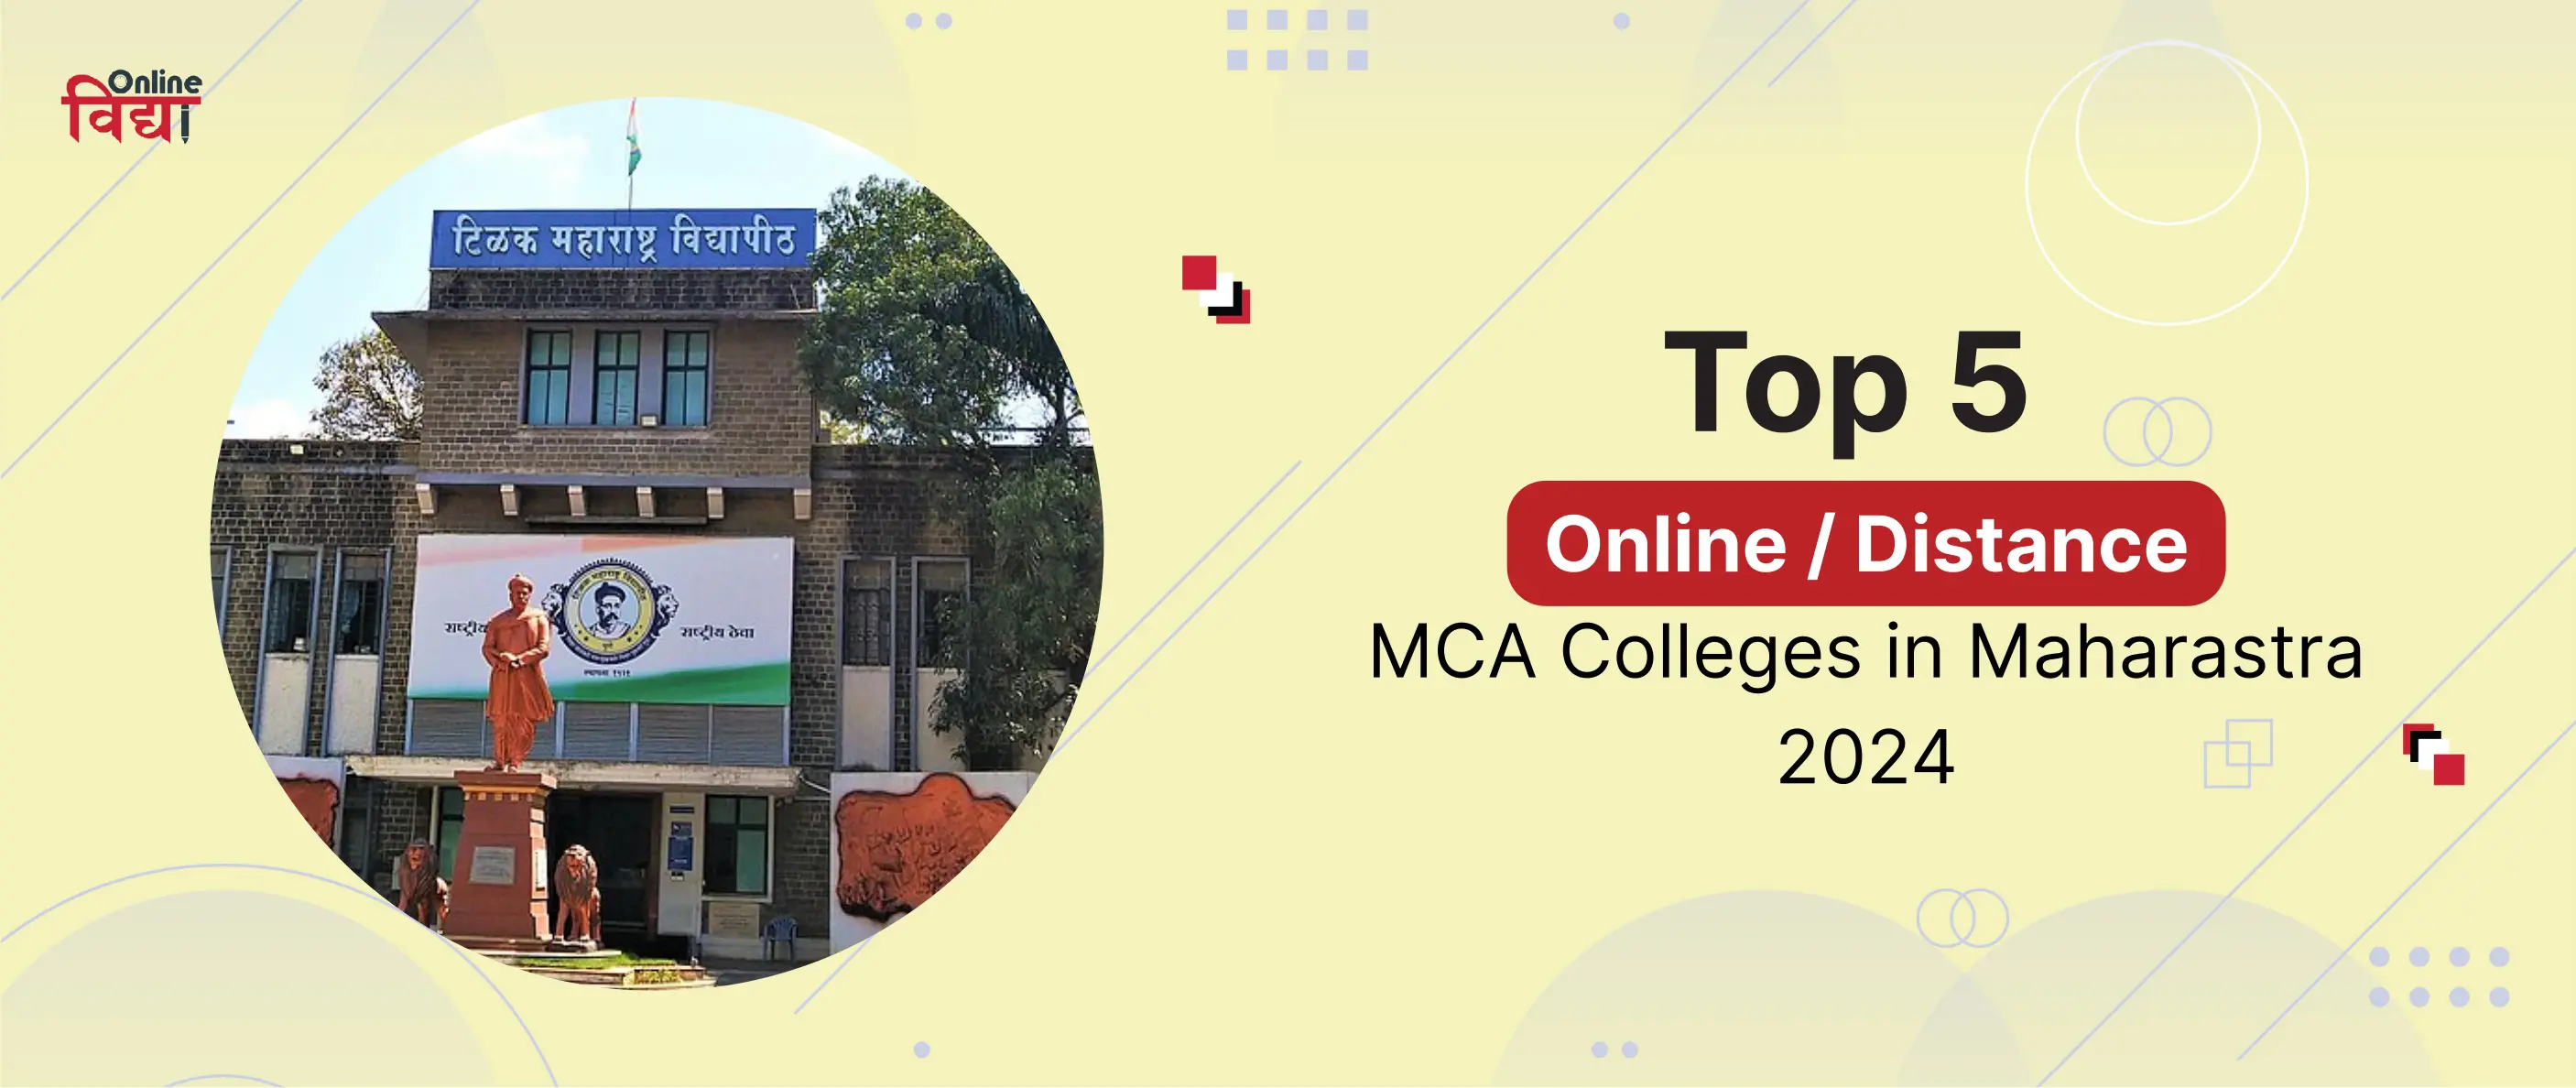 Top 5 Online/Distance MCA Colleges in Maharashtra 2024